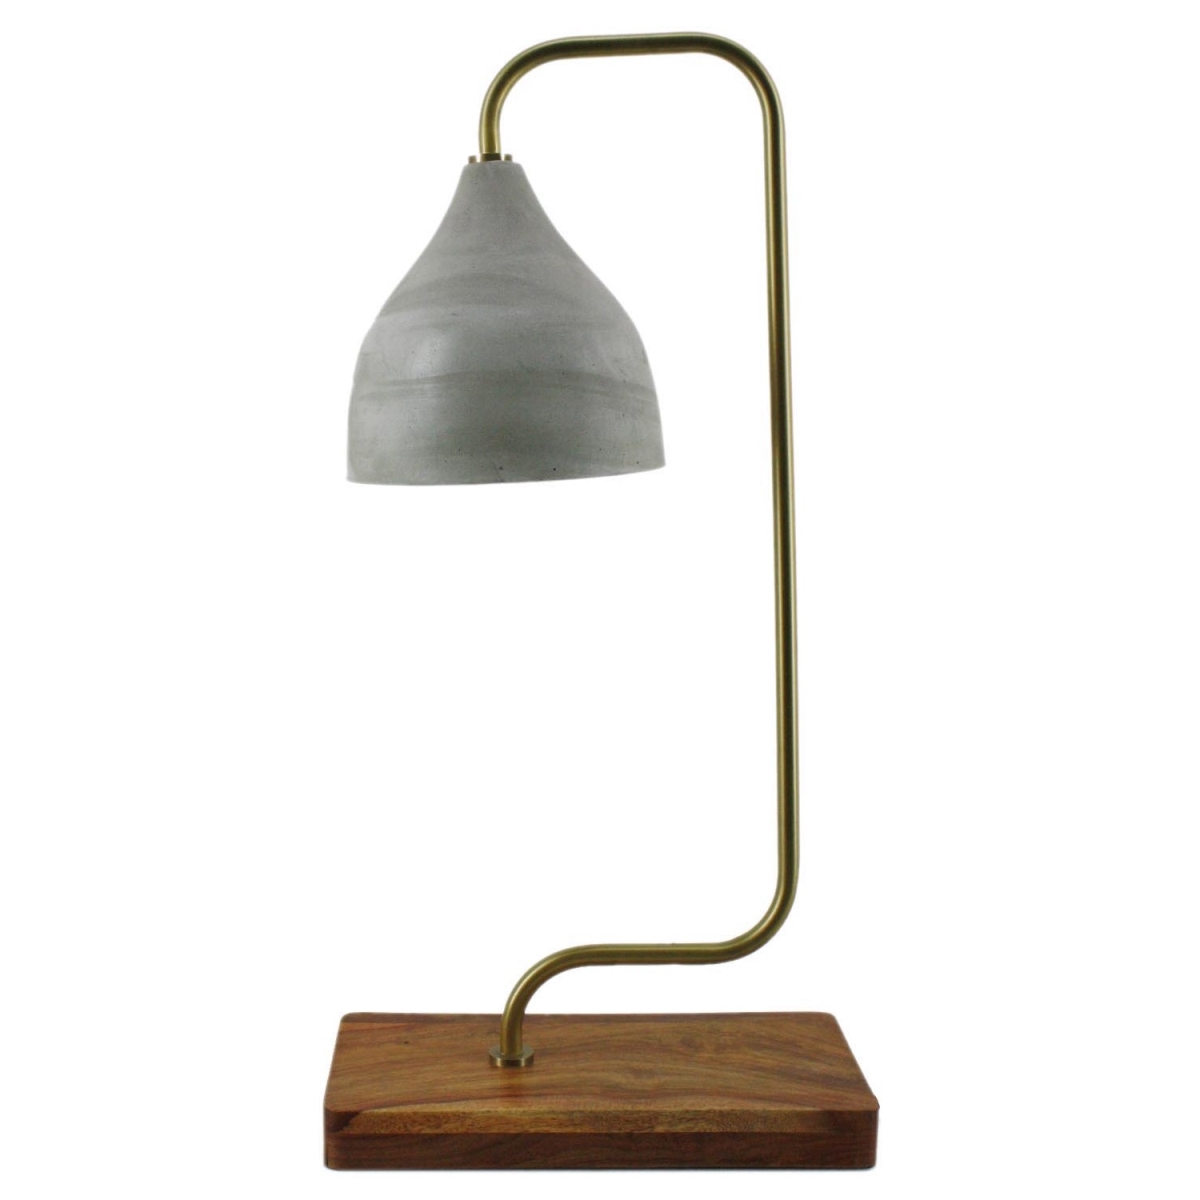 Fd-1019-29 Delft Table Lamp In Concrete, Brass & Wood - Light Grey